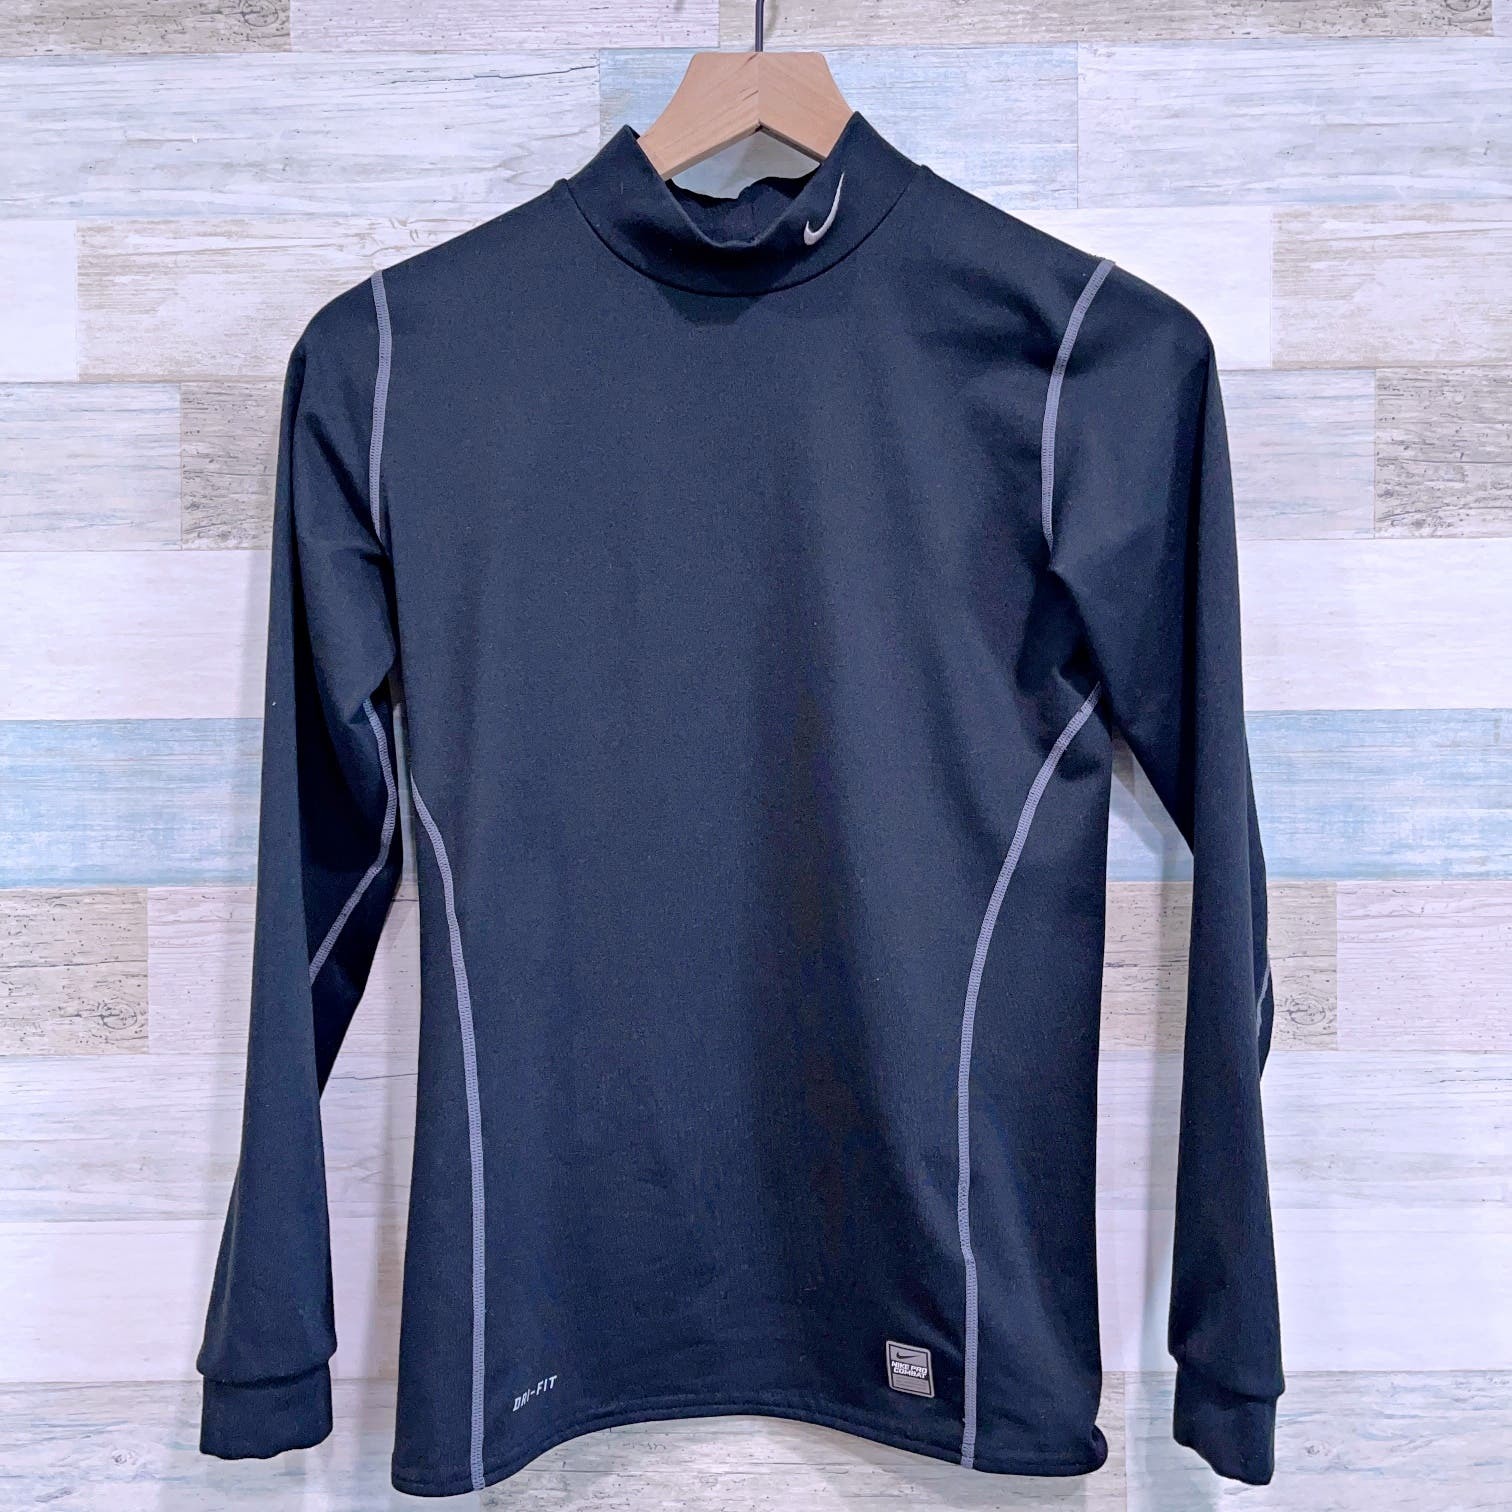 Nike Pro Combat Core Thermal Long Sleeve Mock Neck Compression Top Black Boys XL - $24.74